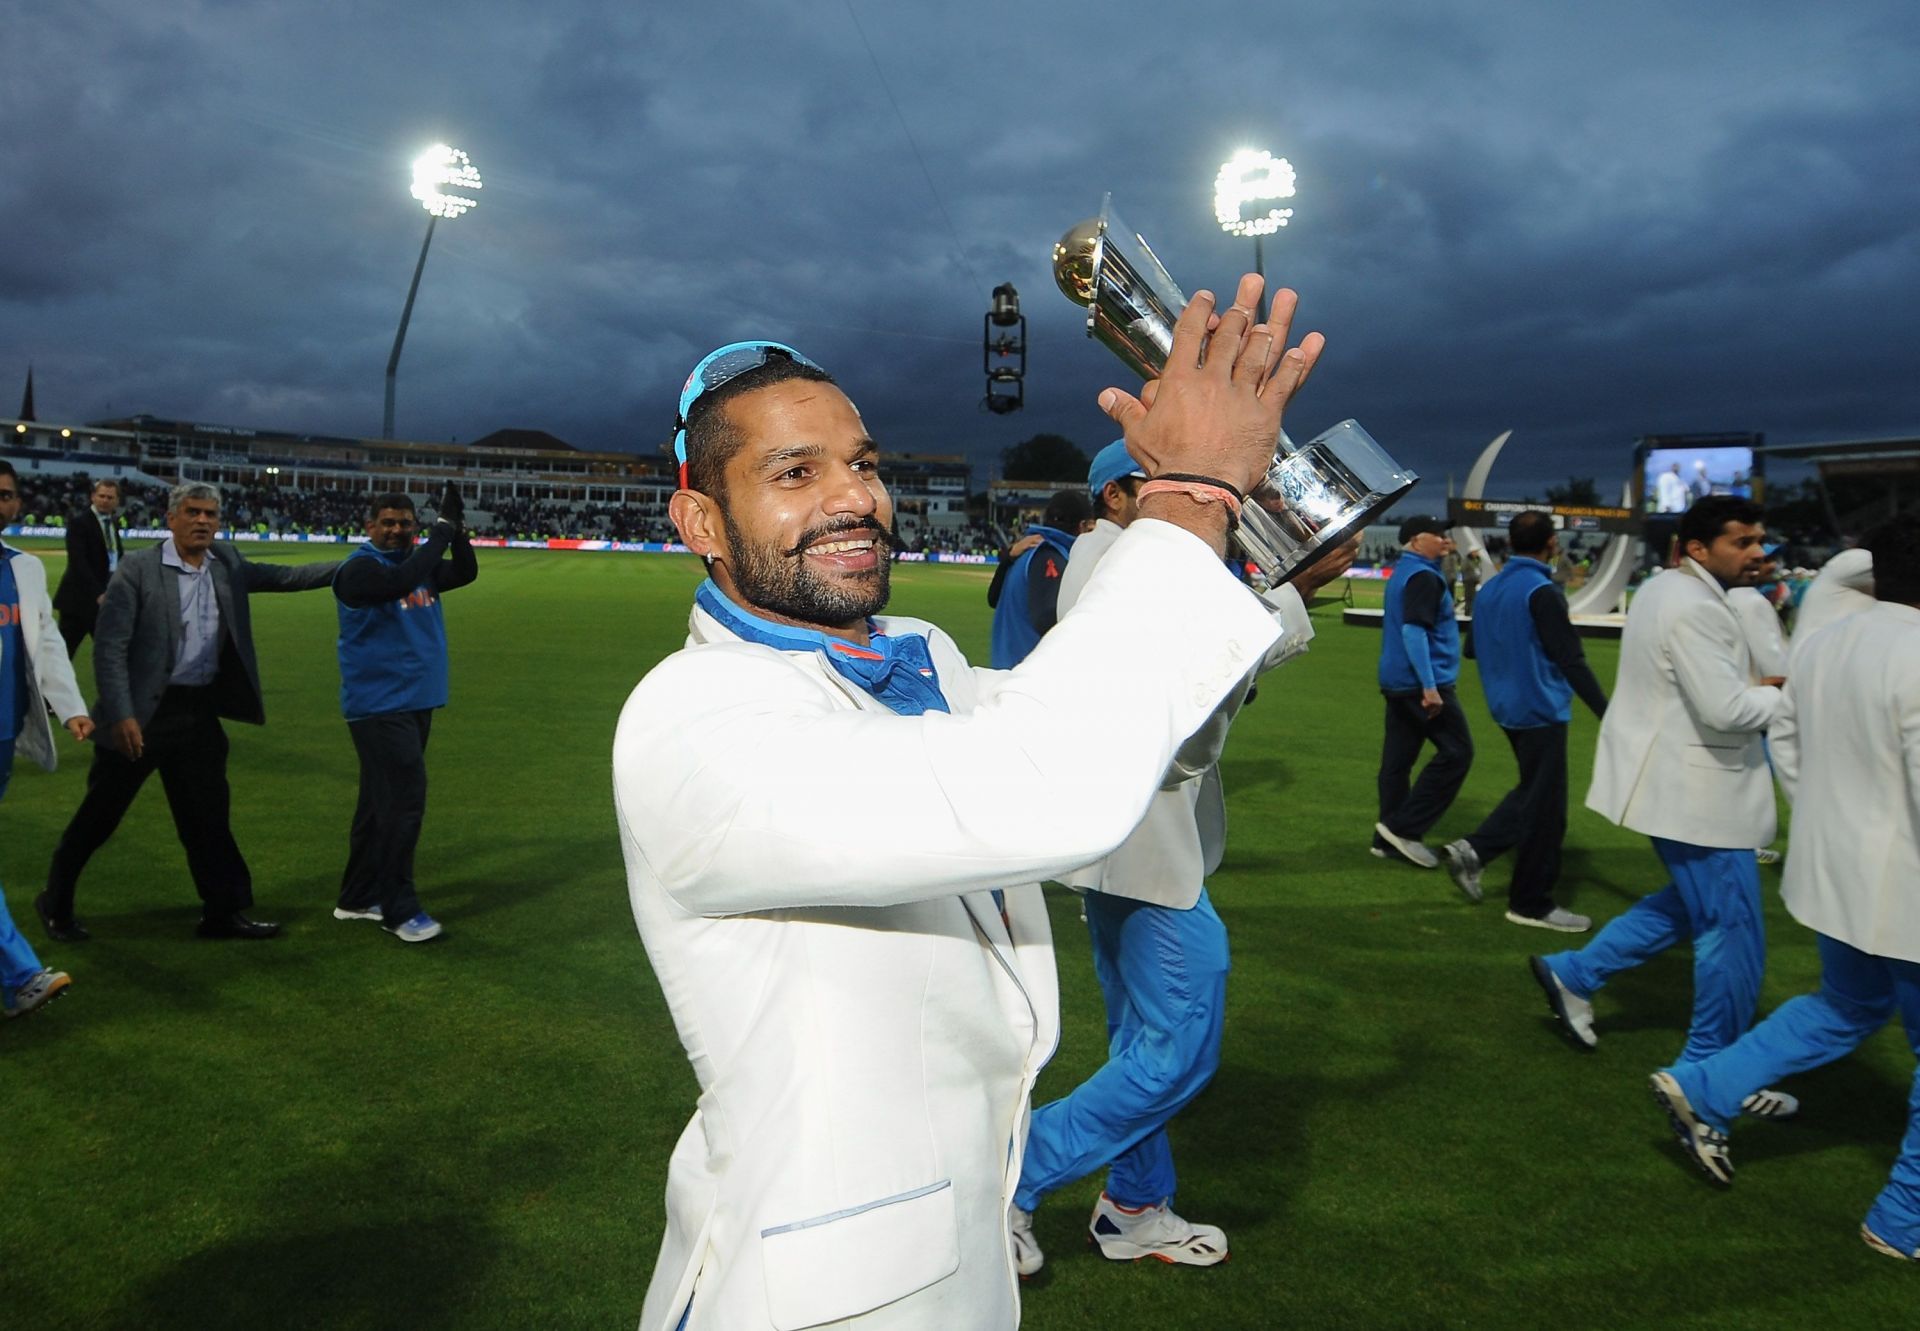 Shikhar Dhawan after winning the 2013 Champions Trophy. (Credits: ICC)